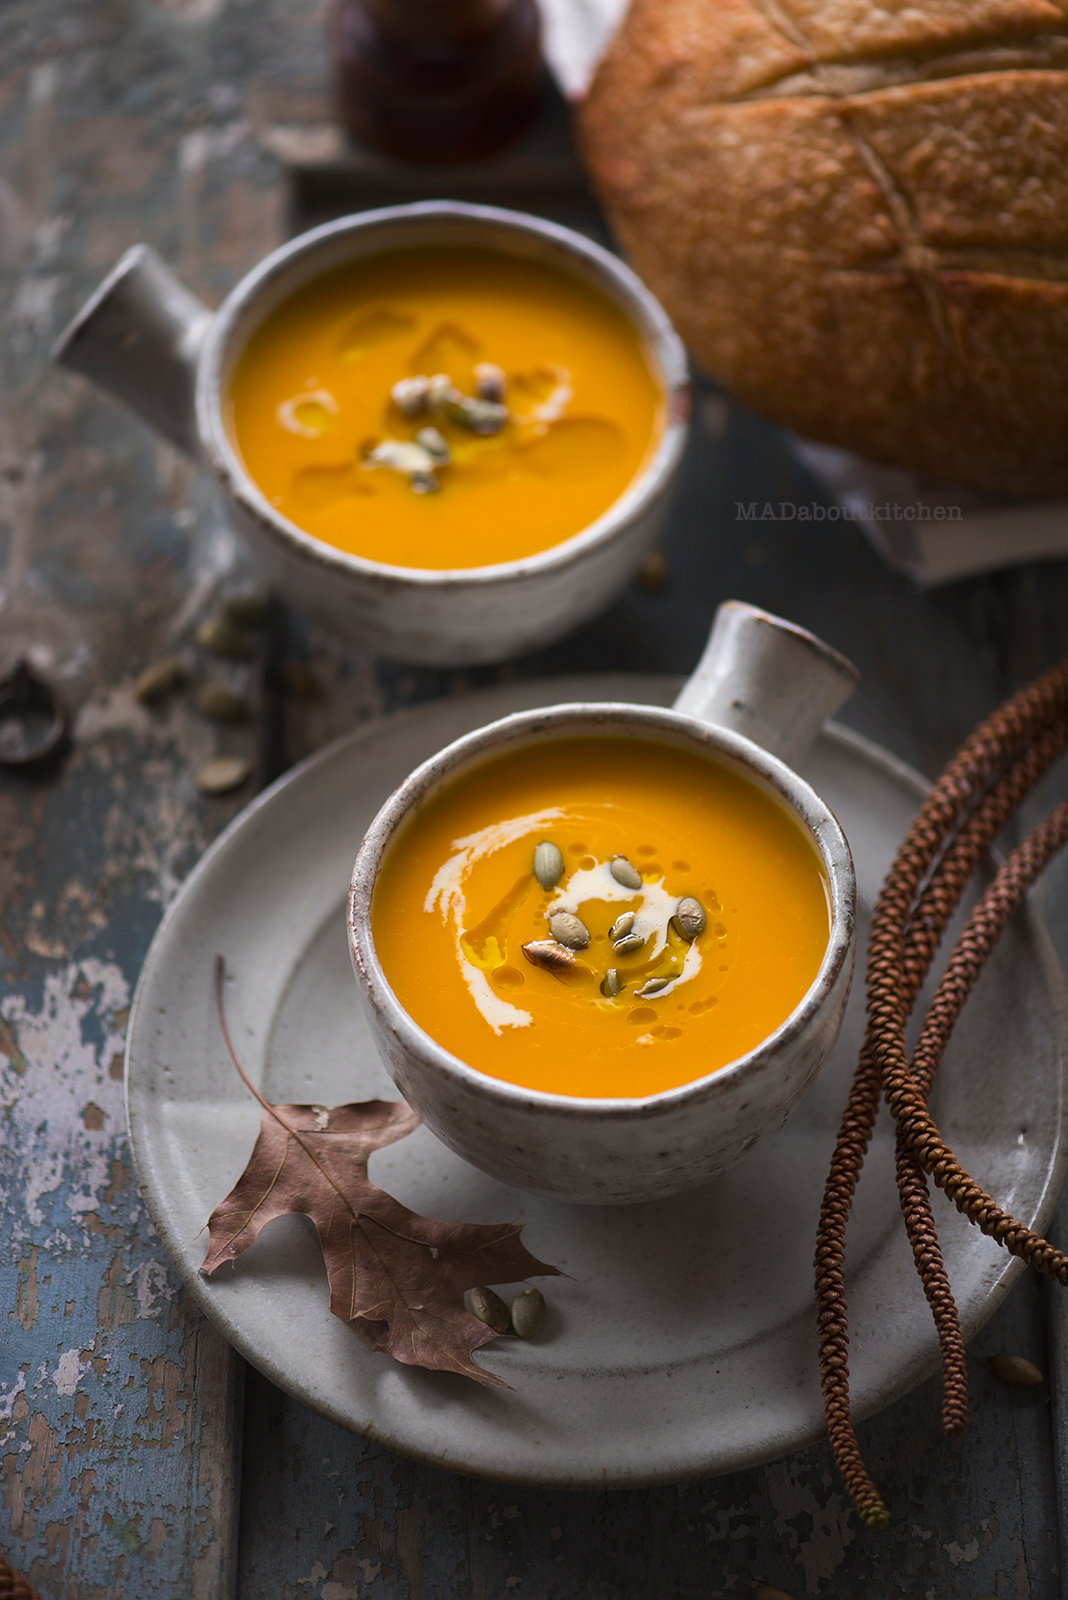 Pumpkin Soup is one of the most common, most basic soups that is made at home.Pumpkin Soup is creamy, thick, smooth and filling.